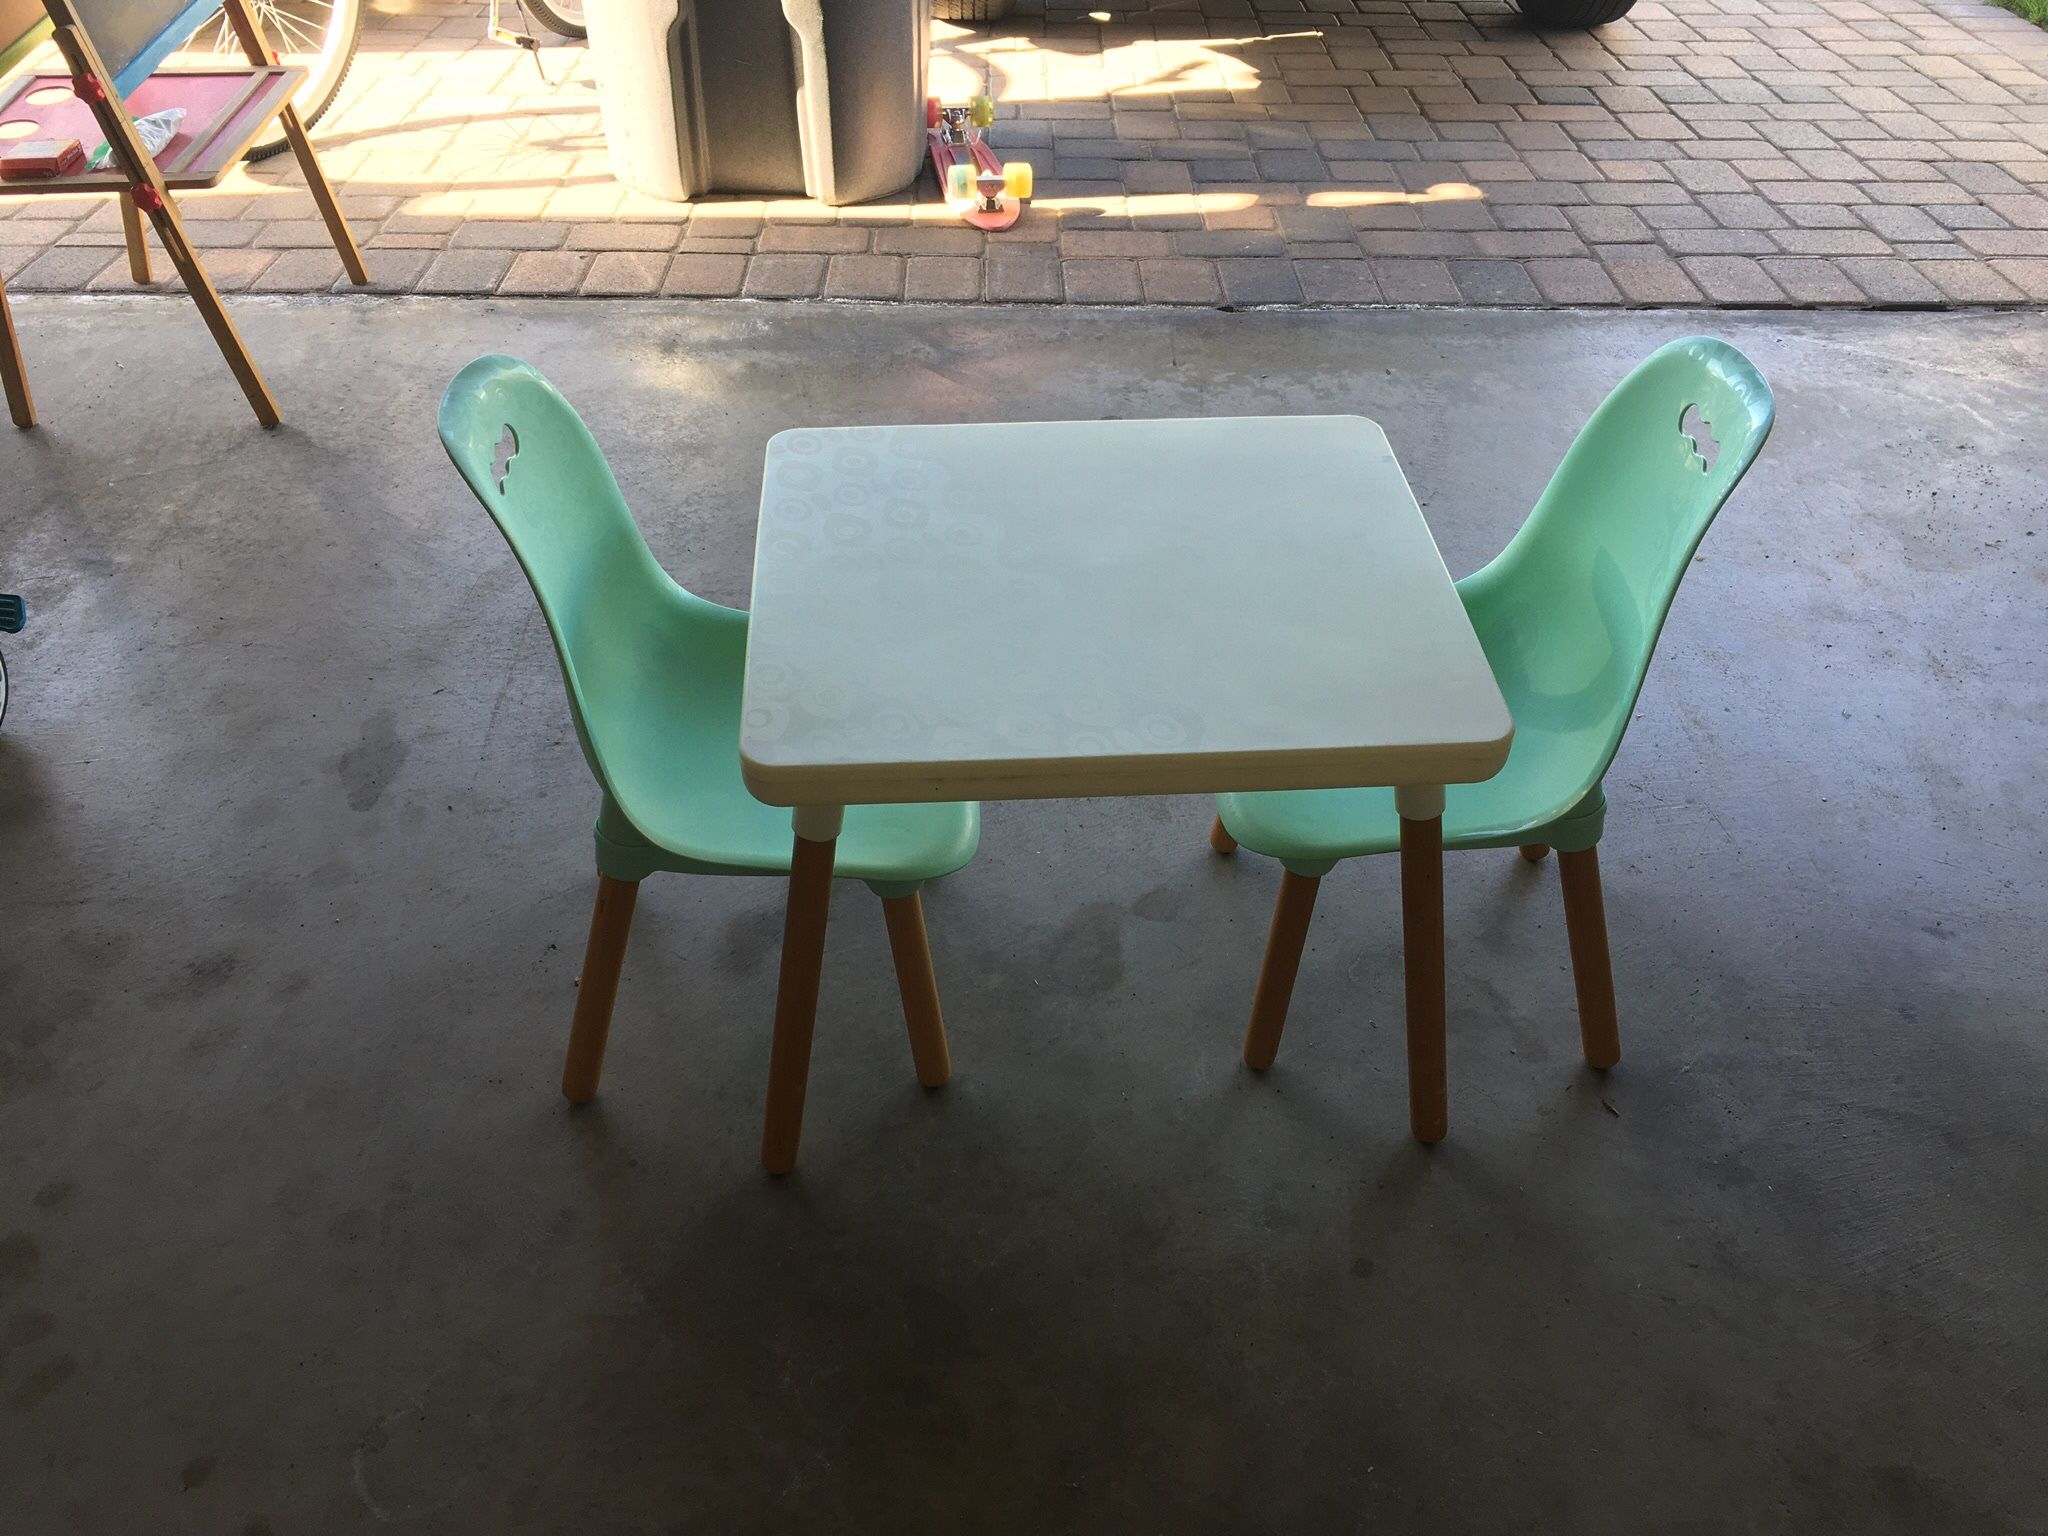 B.Toy Table & Chairs